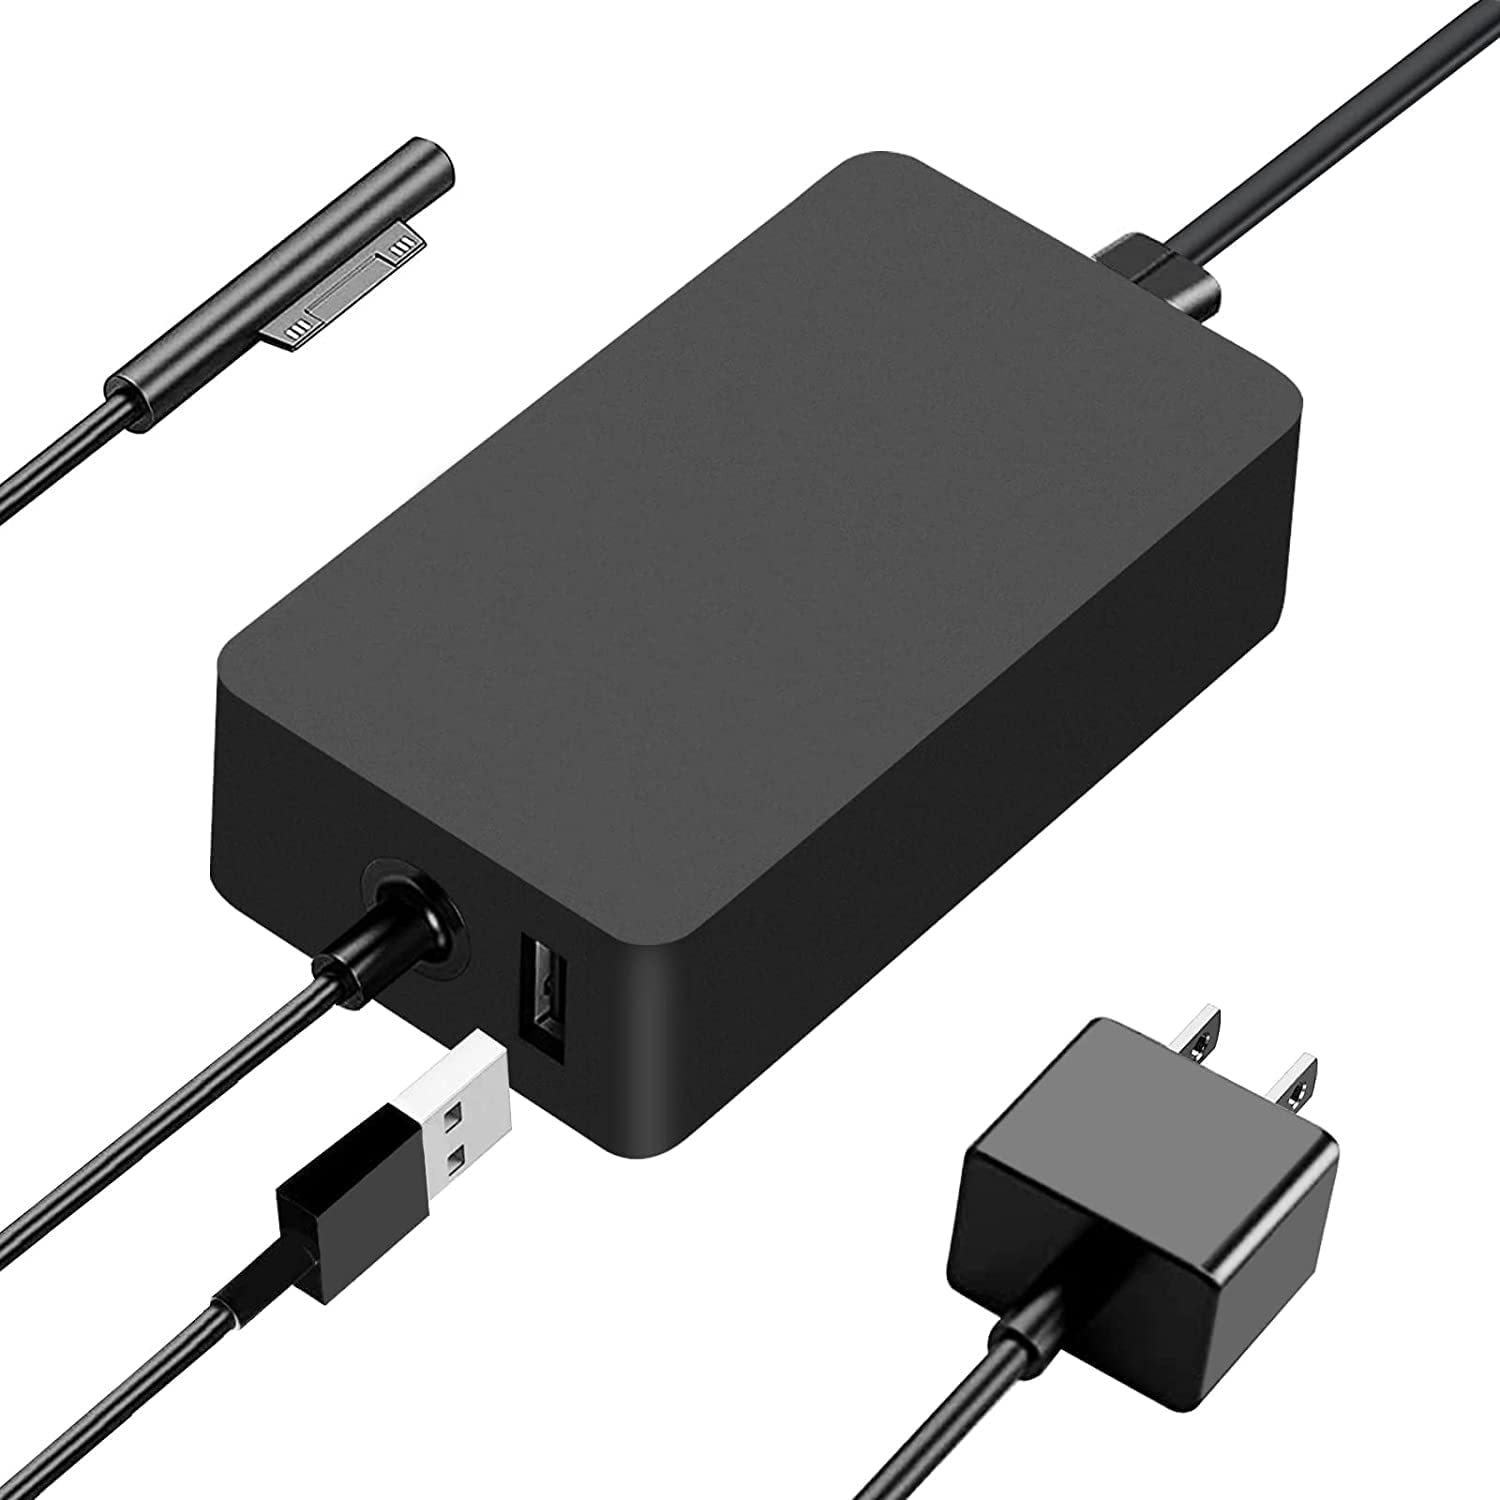 Surface Pro Charger Surface Laptop Charger 65W Compatible with Microsoft Surface Pro 3/4/5/6/7/X,Surface Laptop 1/2/3/4,Surface Go 1/2/3 & Surface Book with 6ft DC Power Cord